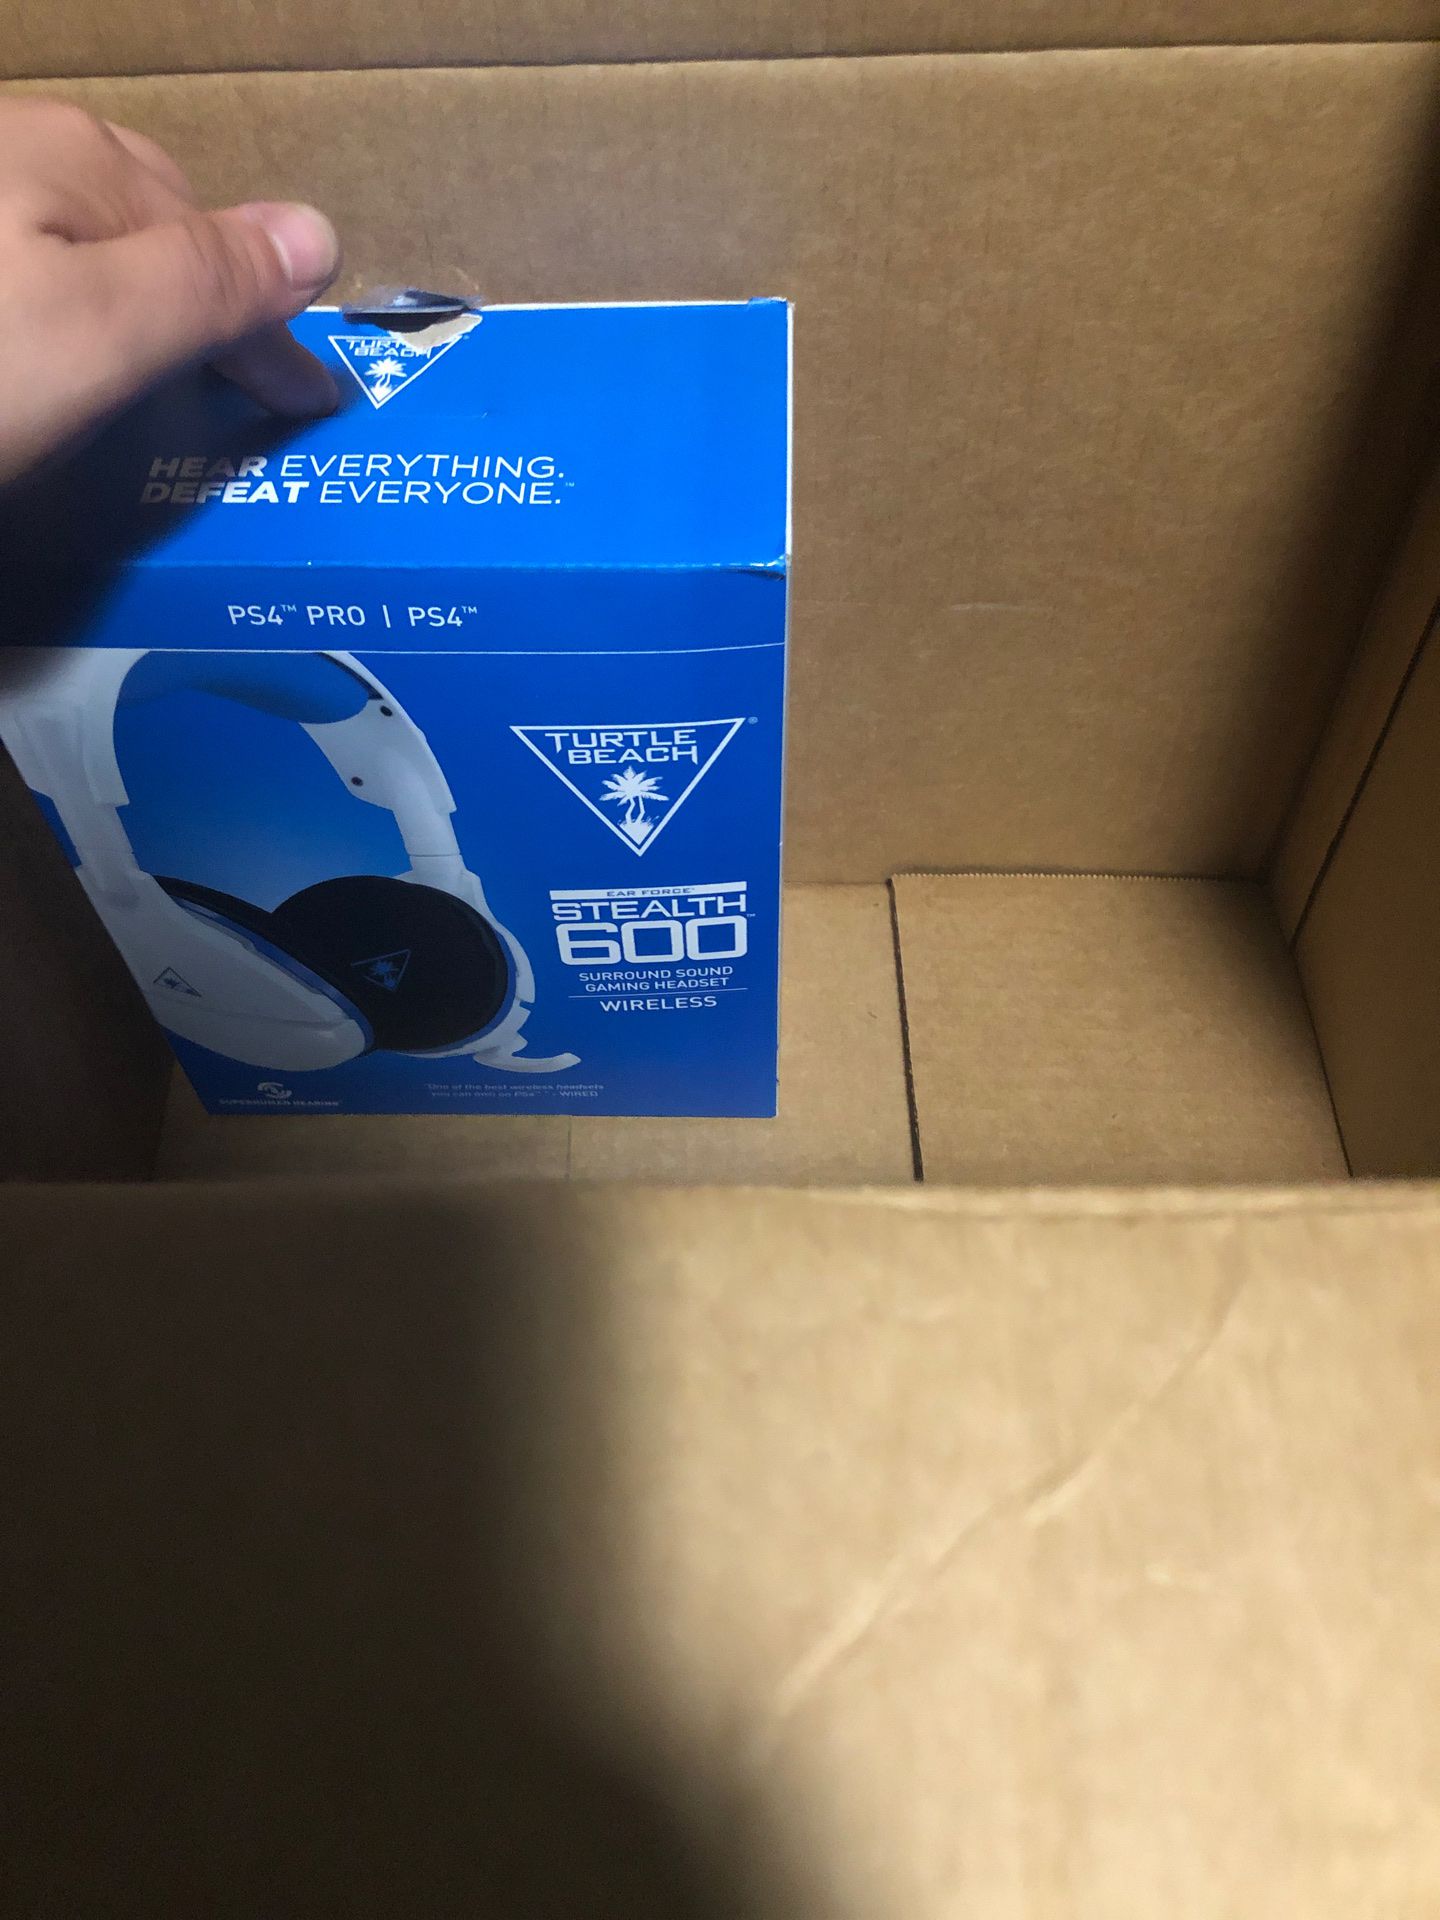 Ps4 Gaming Headset